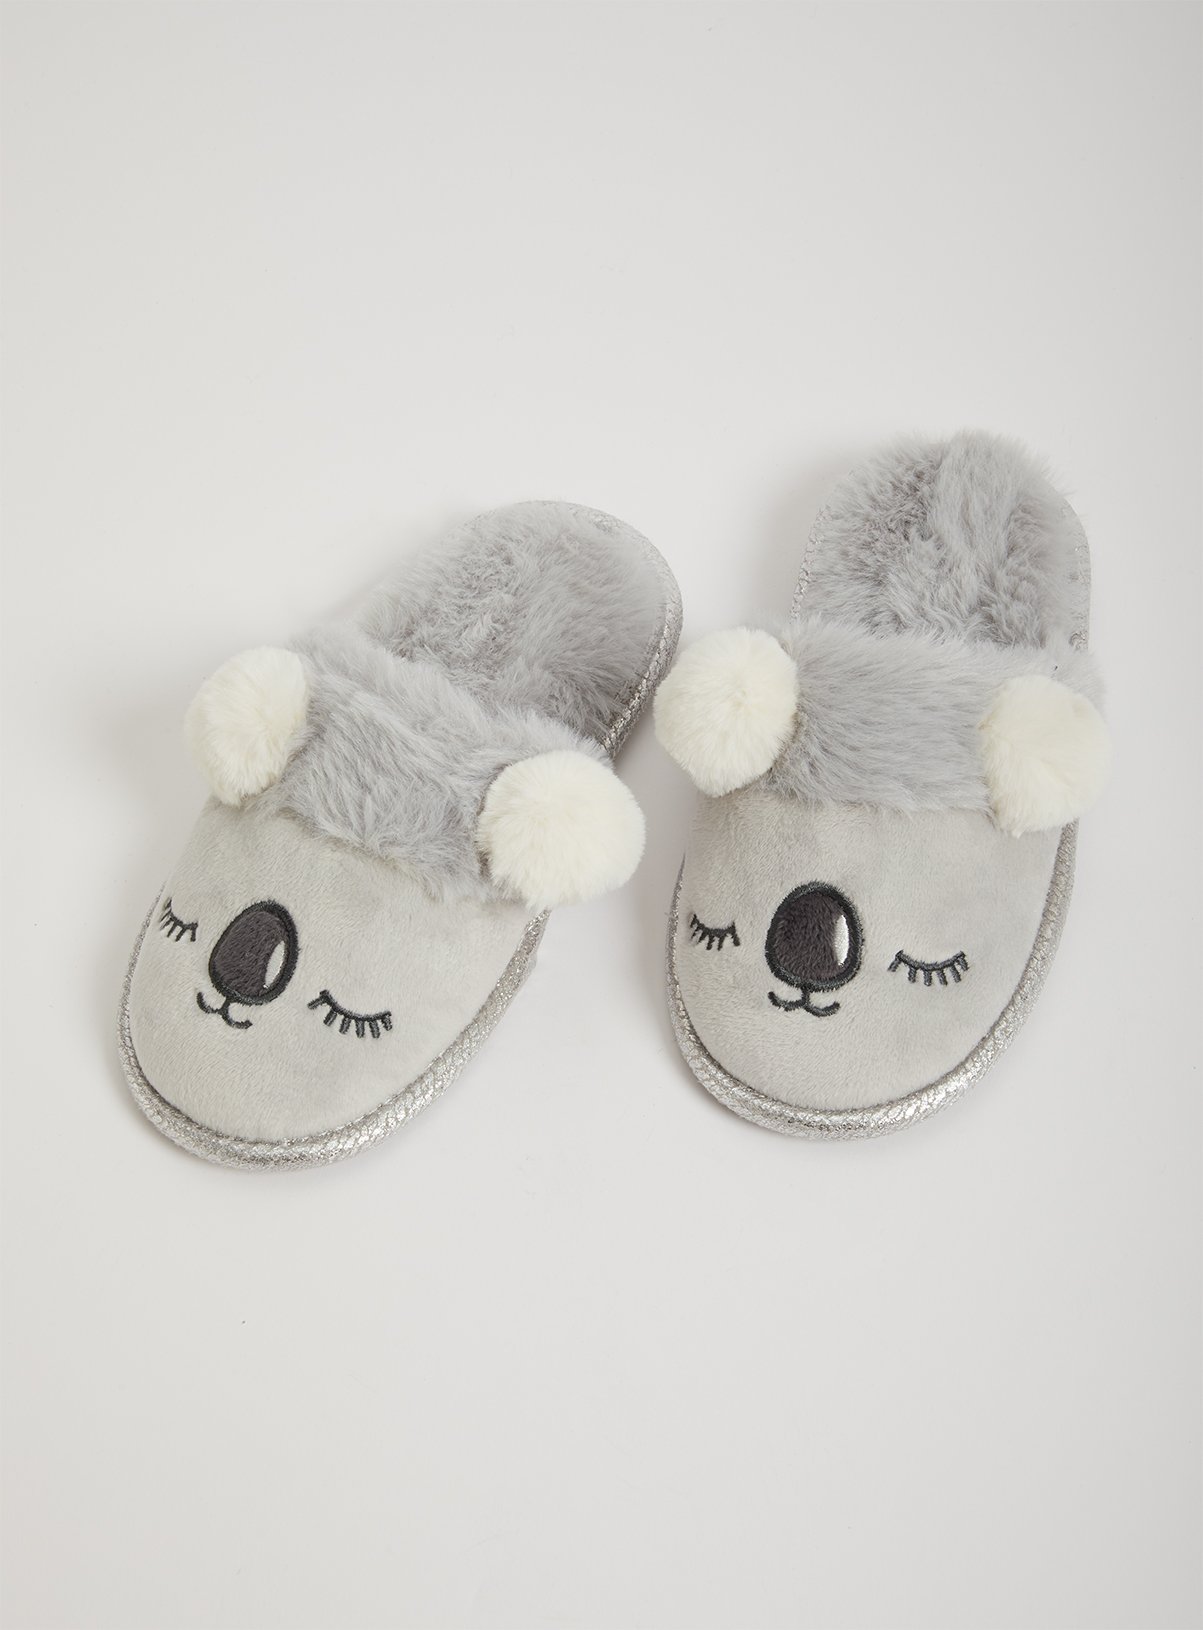 size 7 infant slippers